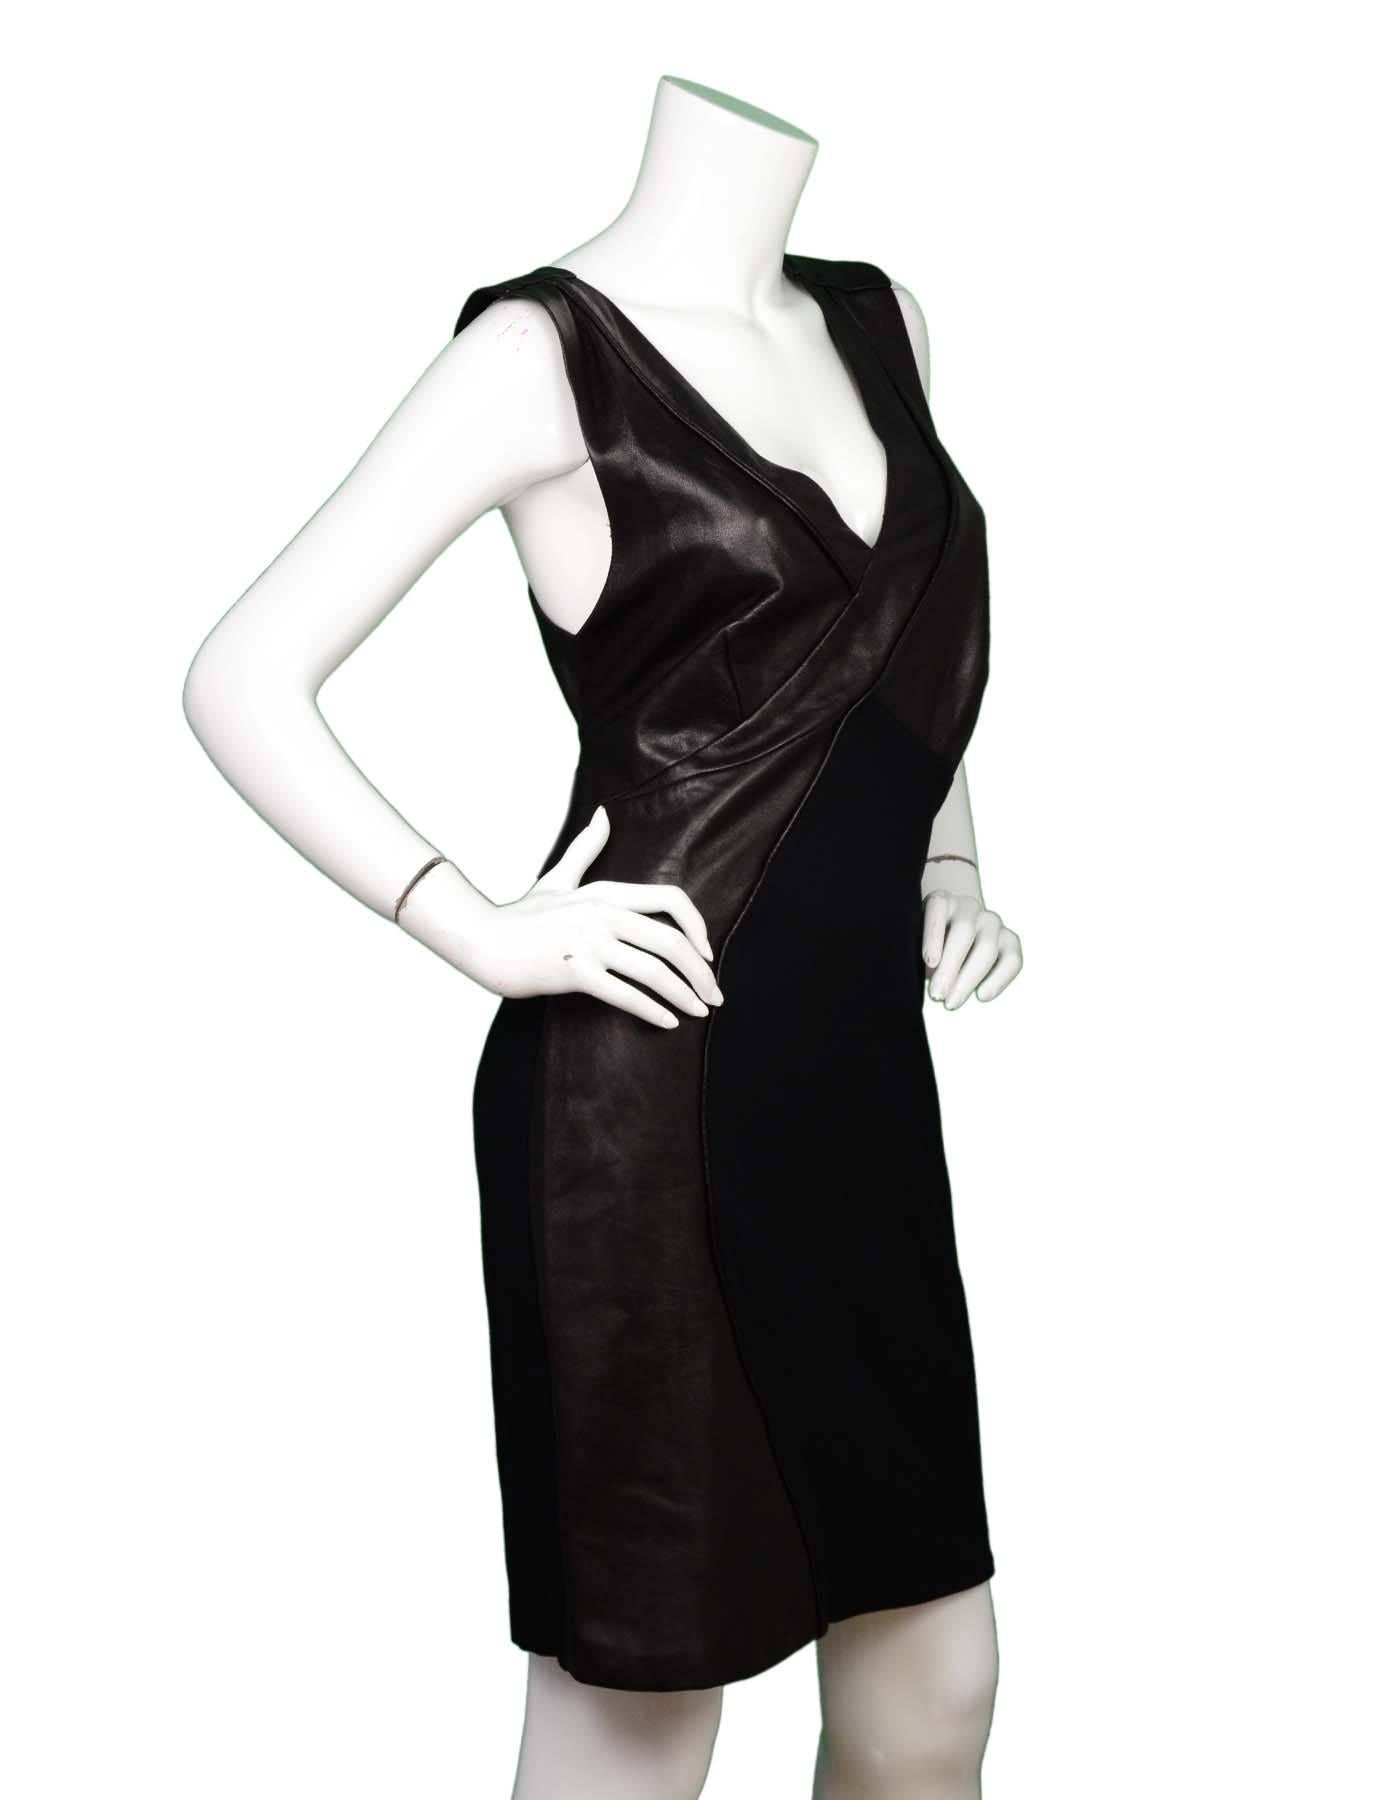 Alice + Olivia Black Leather Dress Sz L

Features V-neck and asymmetrical straps at back

Color: Black
Composition: 35% Lambskin, 48% Rayon, 15% Nylon, 2% Polyurethane
Lining: Black textile
Closure/Opening: Hidden side-zip closure
Overall